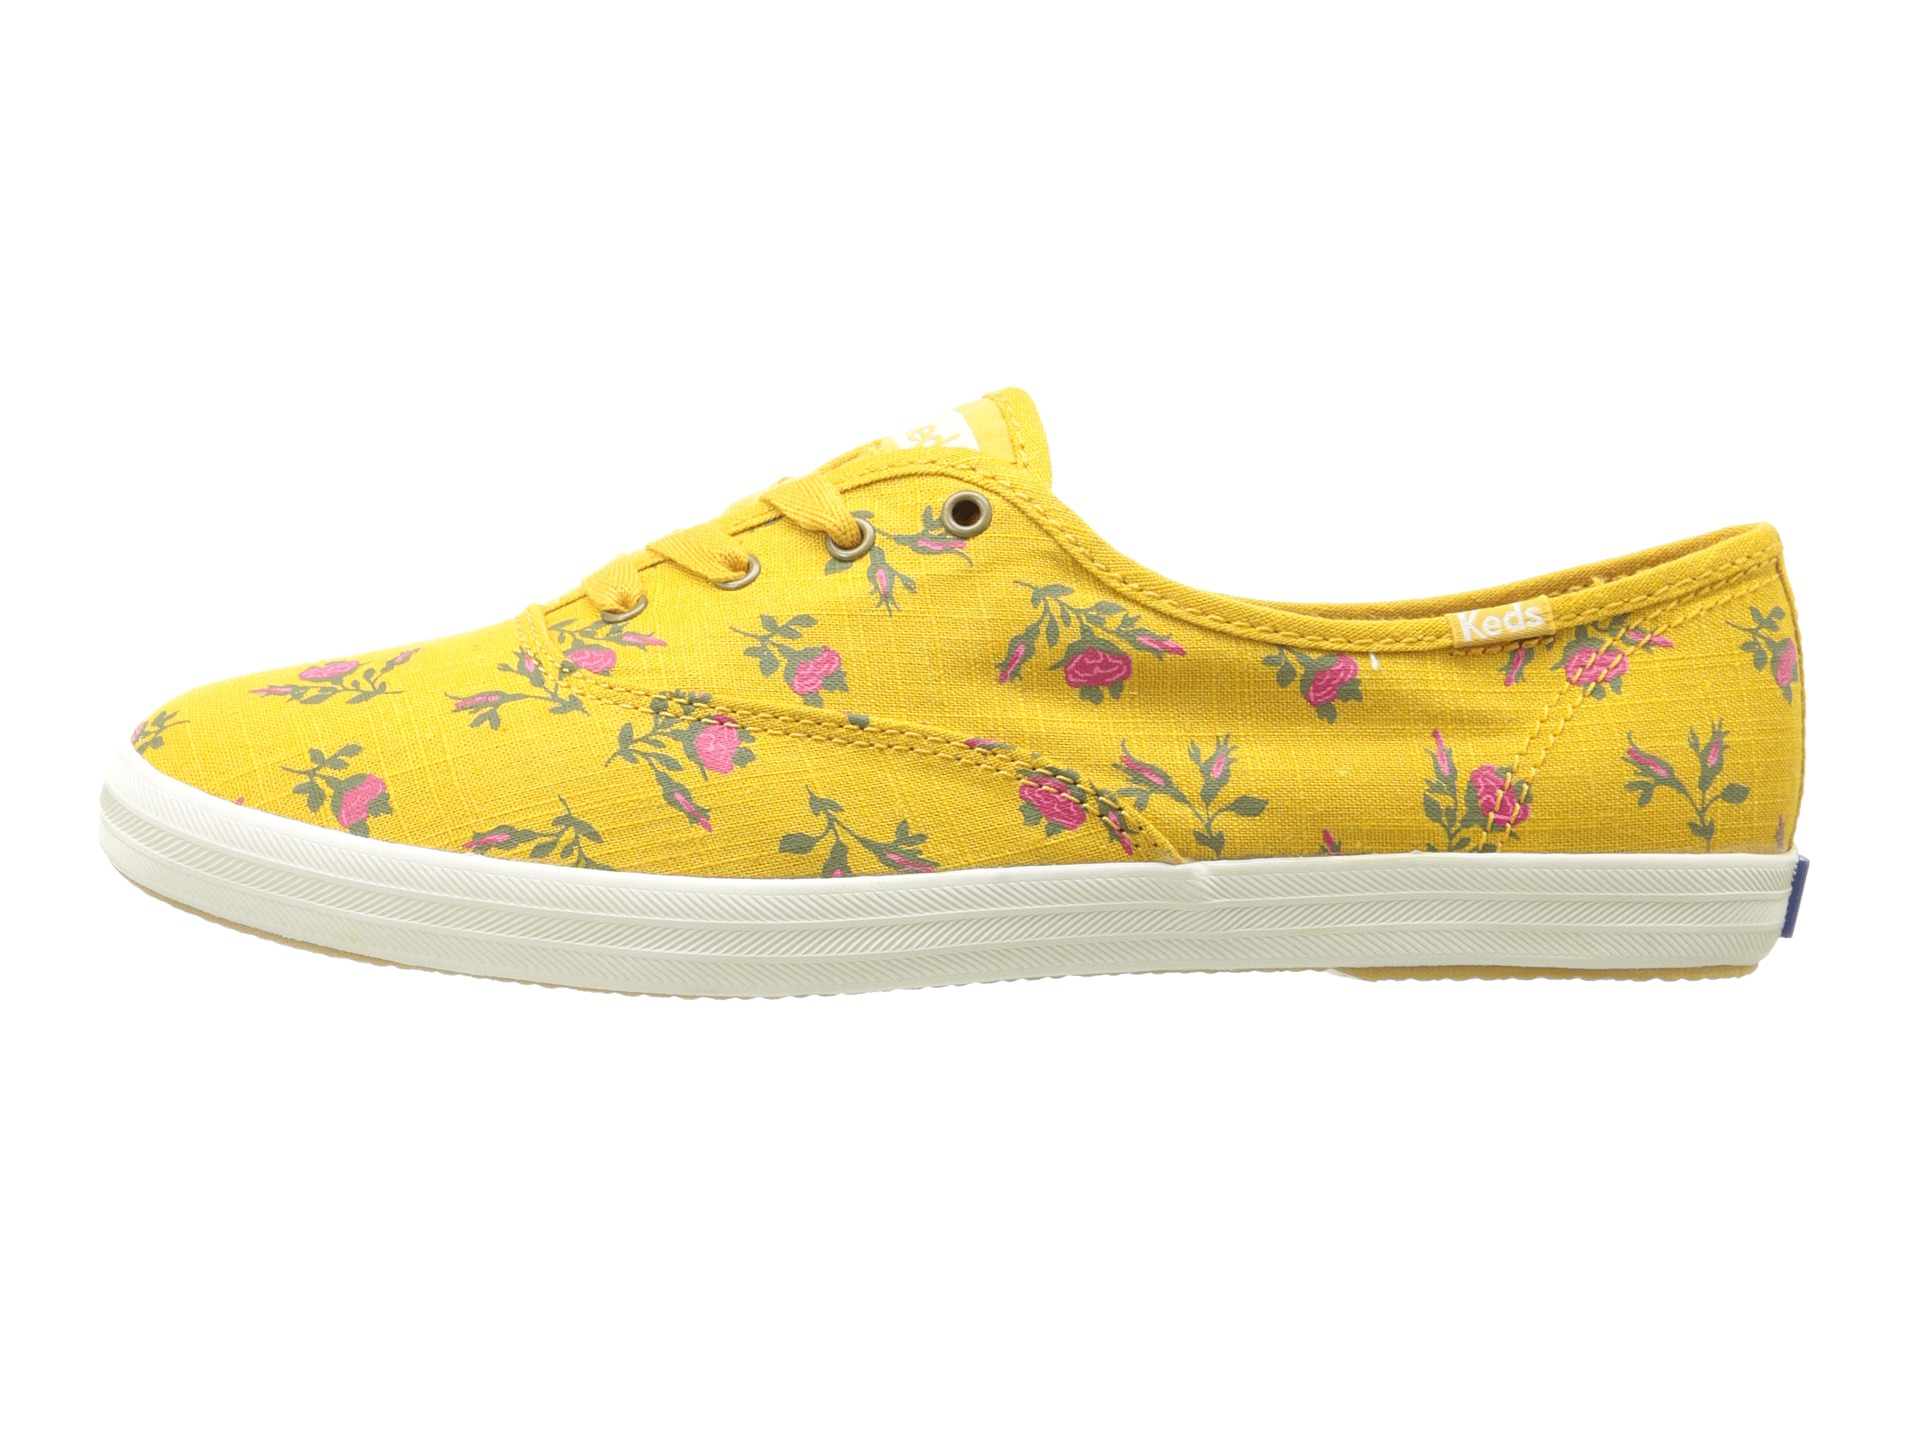 Keds Champion Floral in Mustard Yellow (Yellow) - Lyst